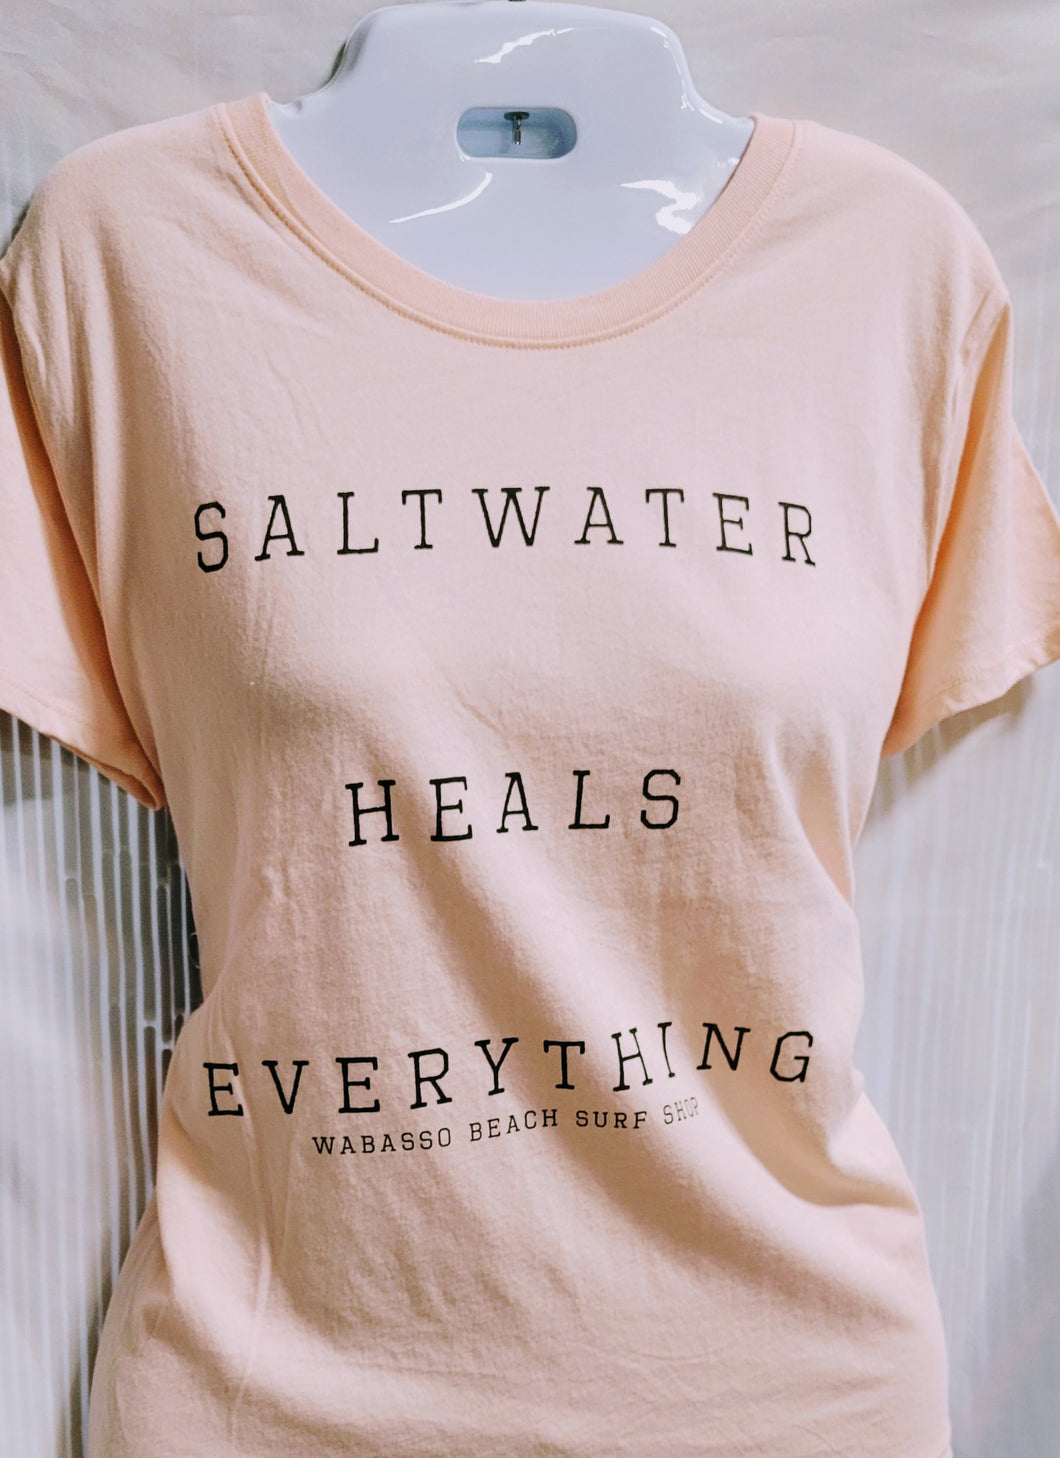 Yesterdays Saltwater Heals Everything SS TS